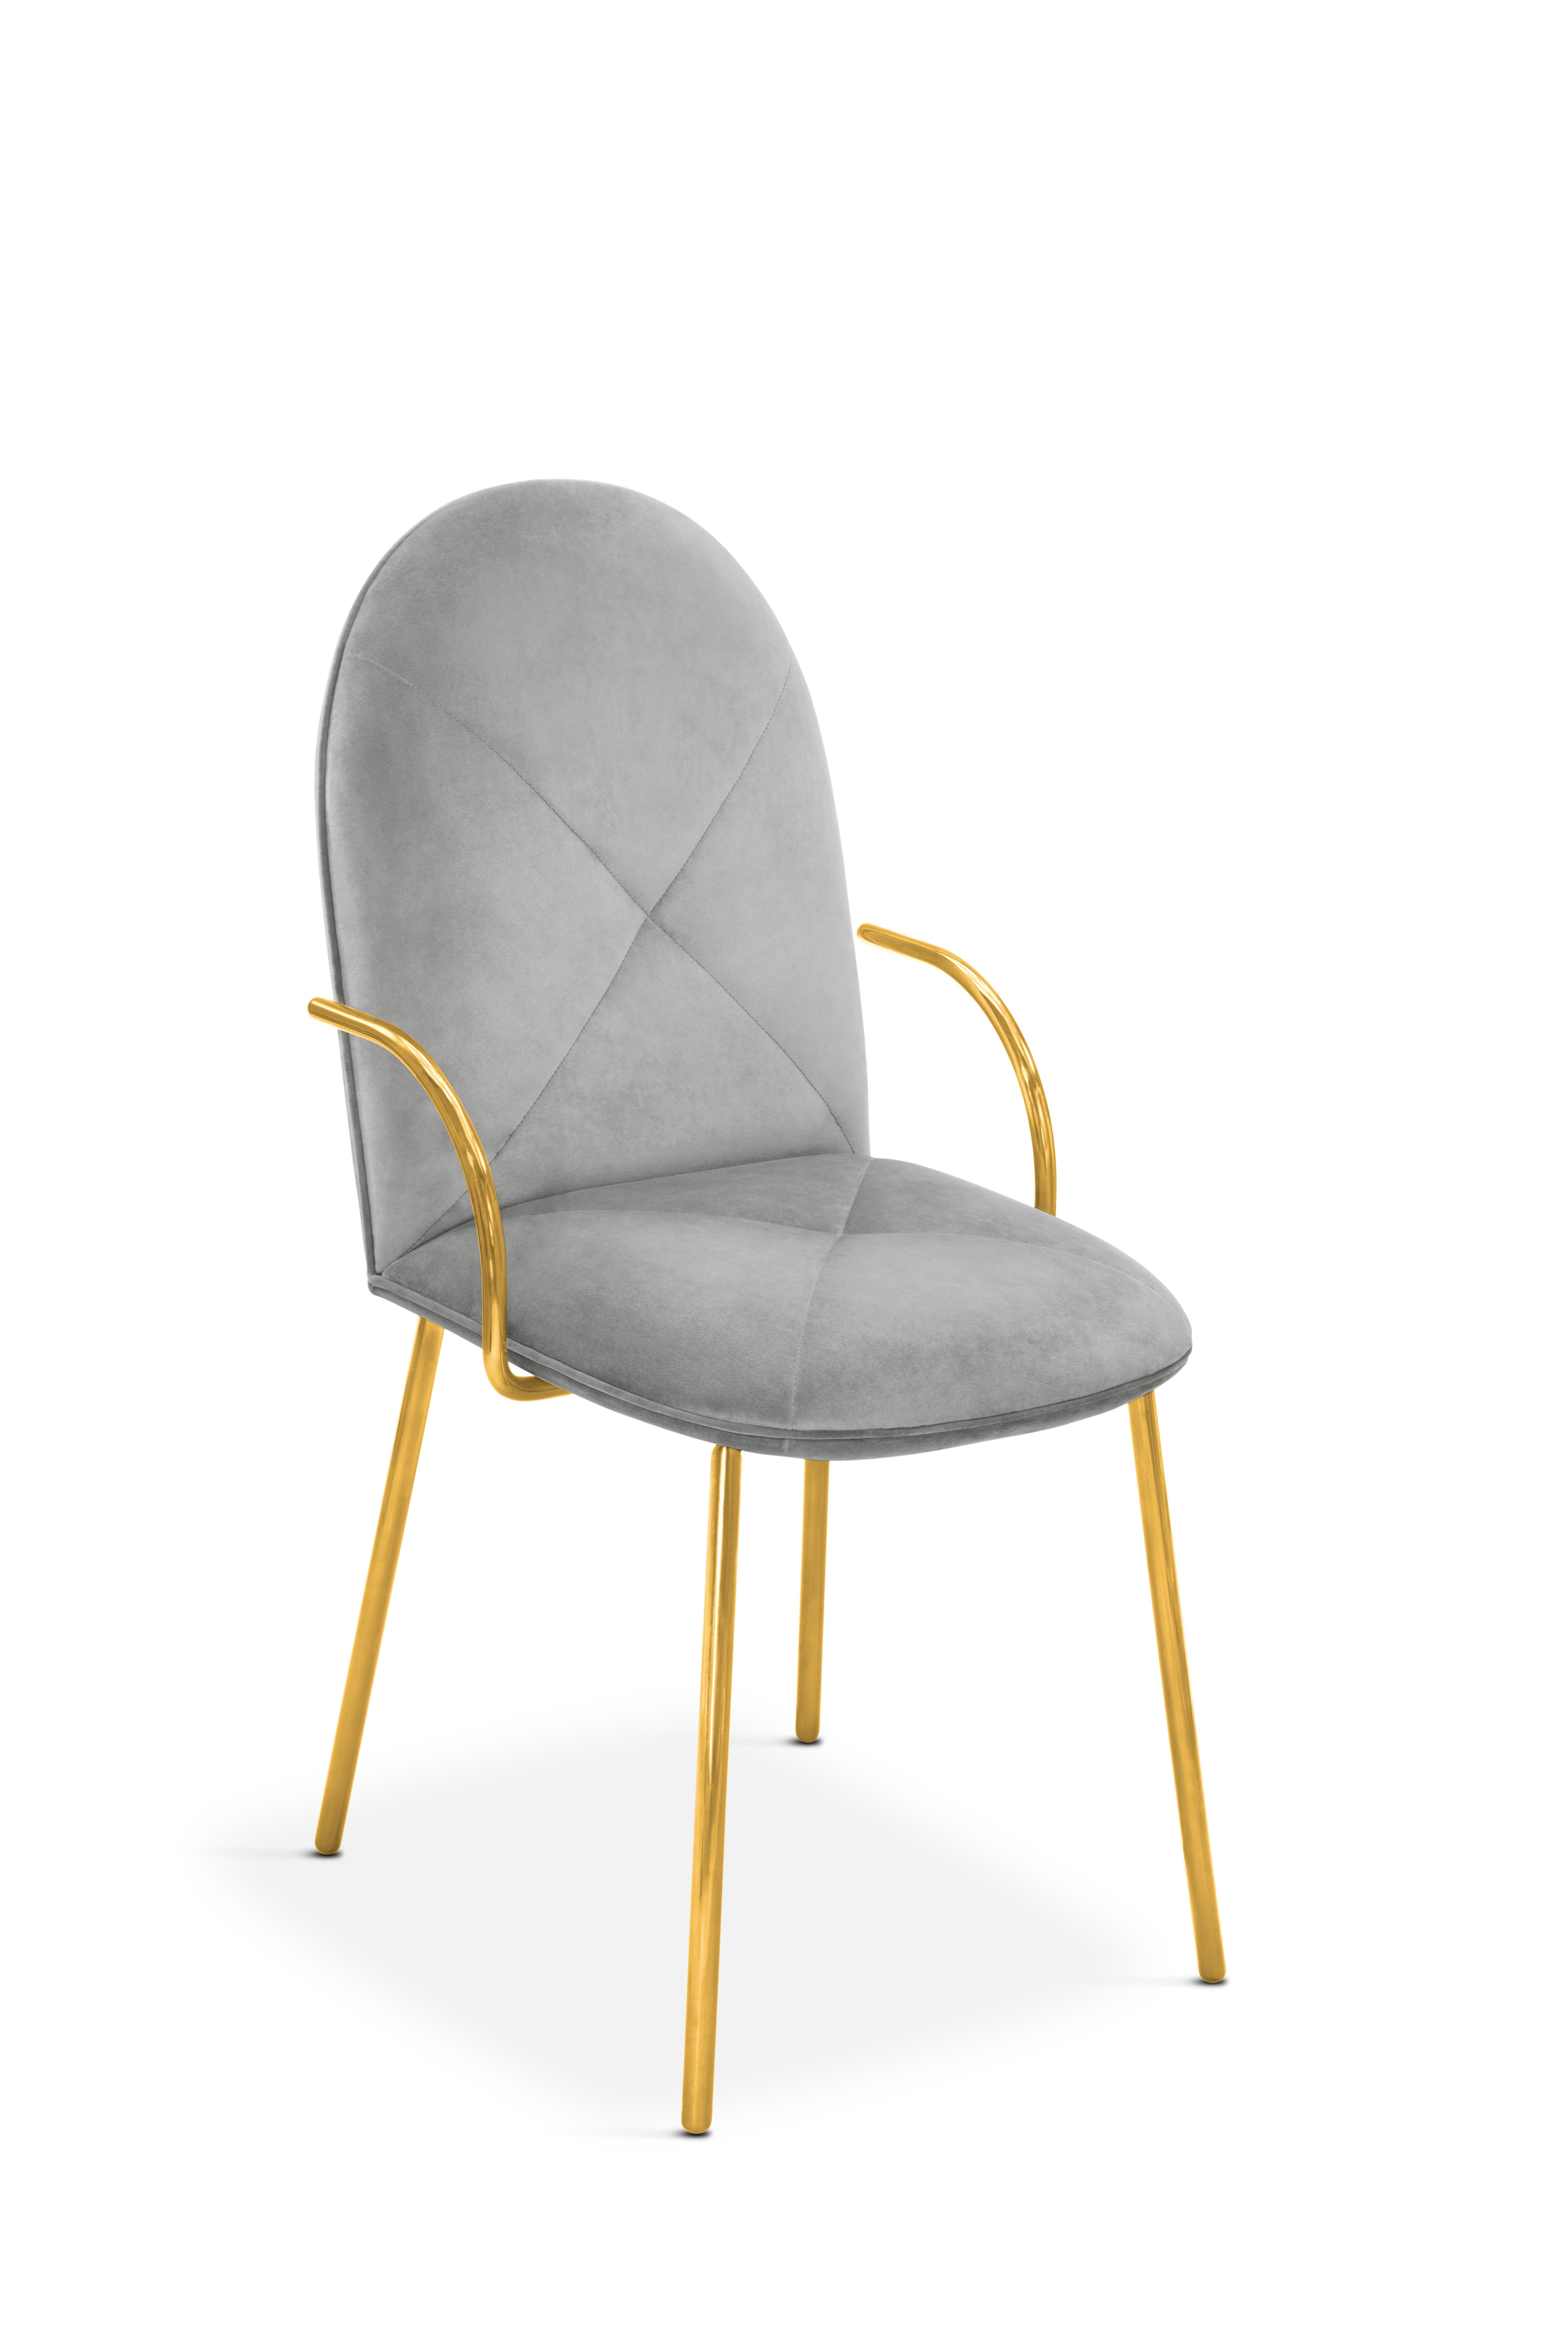 Orion Dining Chair with Plush Gray Velvet and Gold Arms by Nika Zupanc is a chic chair in gray velvet and gold metal. It is designed in delicate lines for comfort and style.

Nika Zupanc, a strikingly renowned Slovenian designer, never shies away